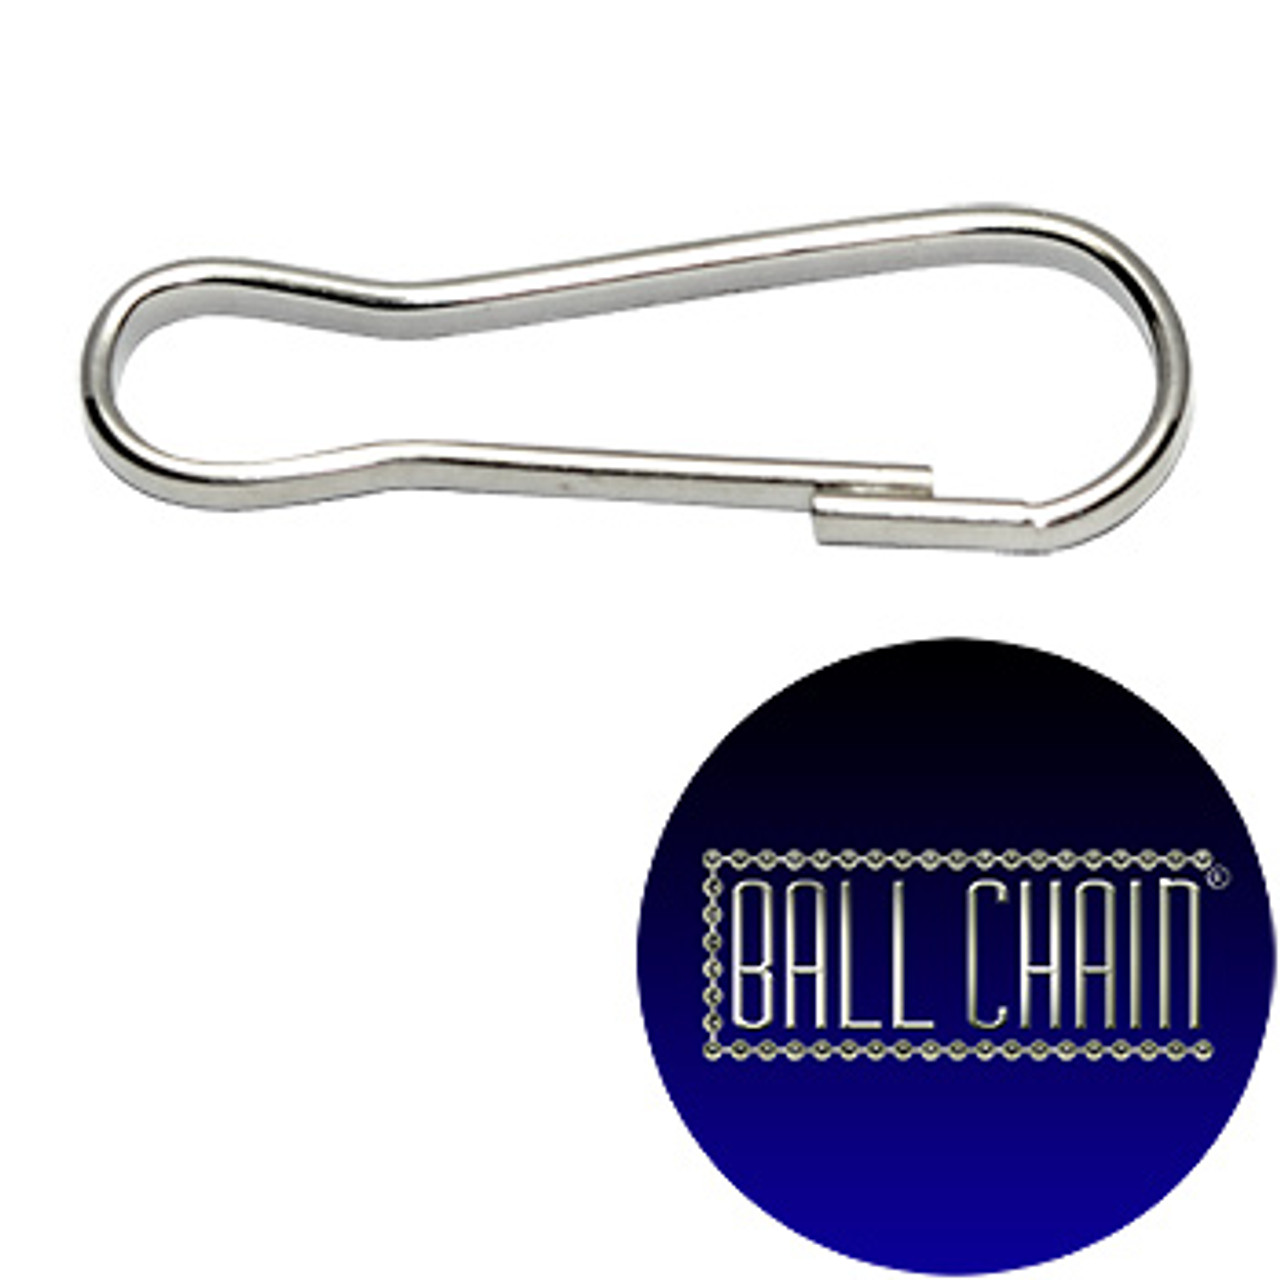 Snap Hooks - 1 Inch Size - Nickel Plated Steel